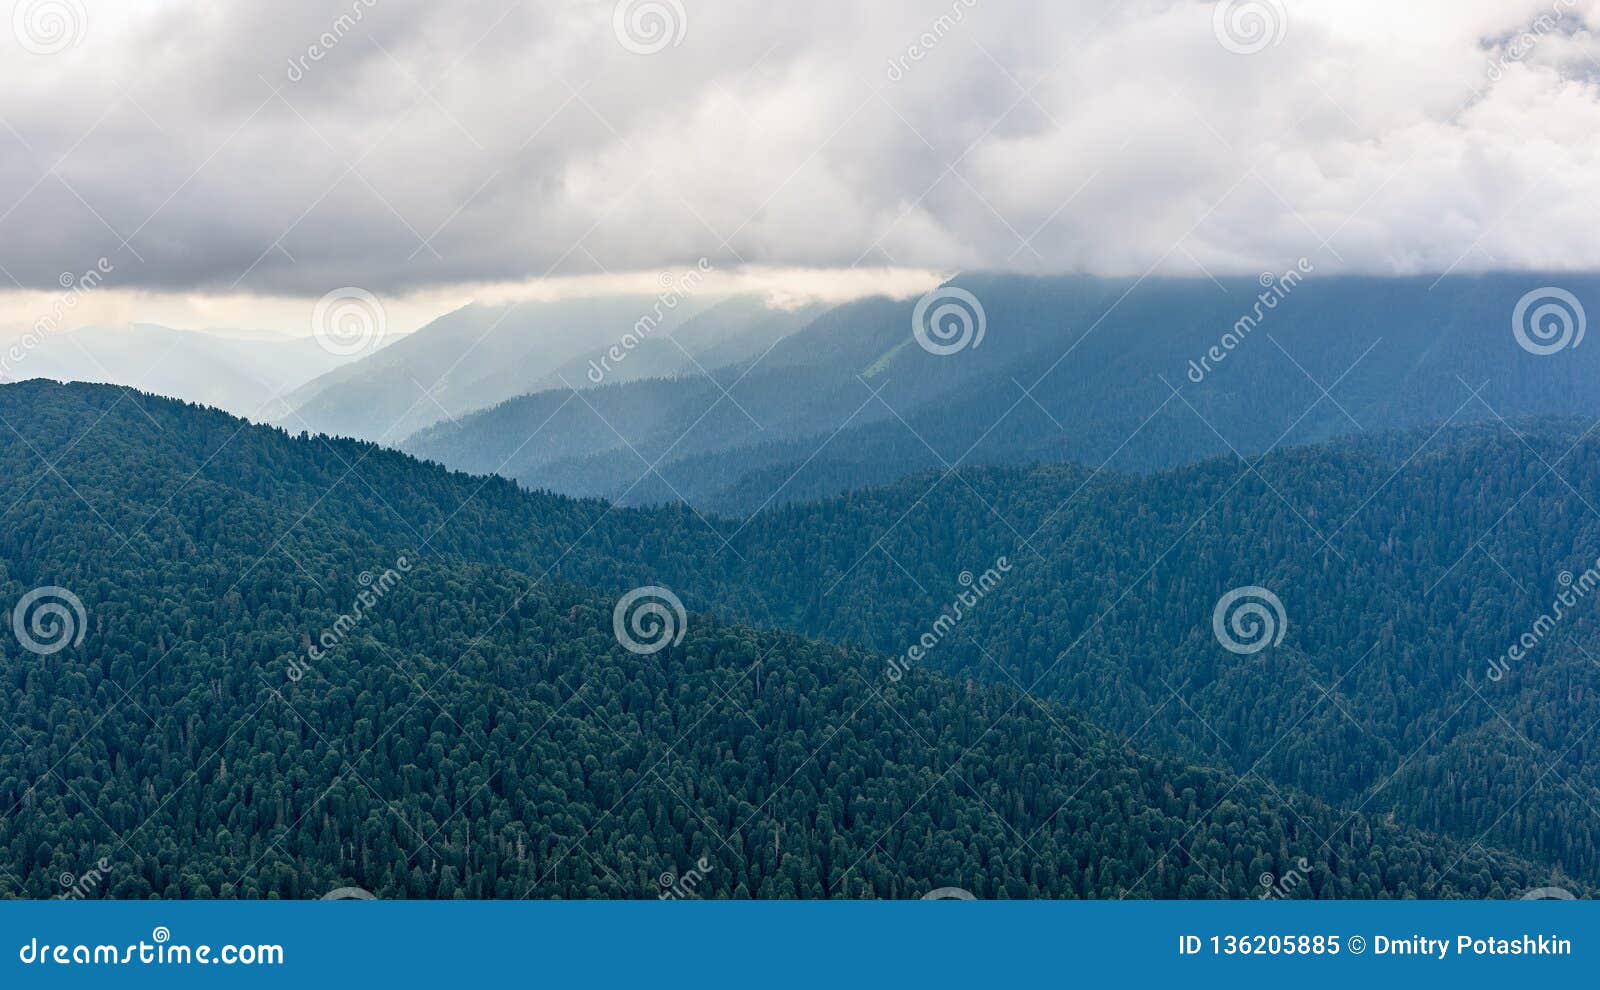 Majestic Landscape Of Summer Mountains A View Of The Misty Slopes Of